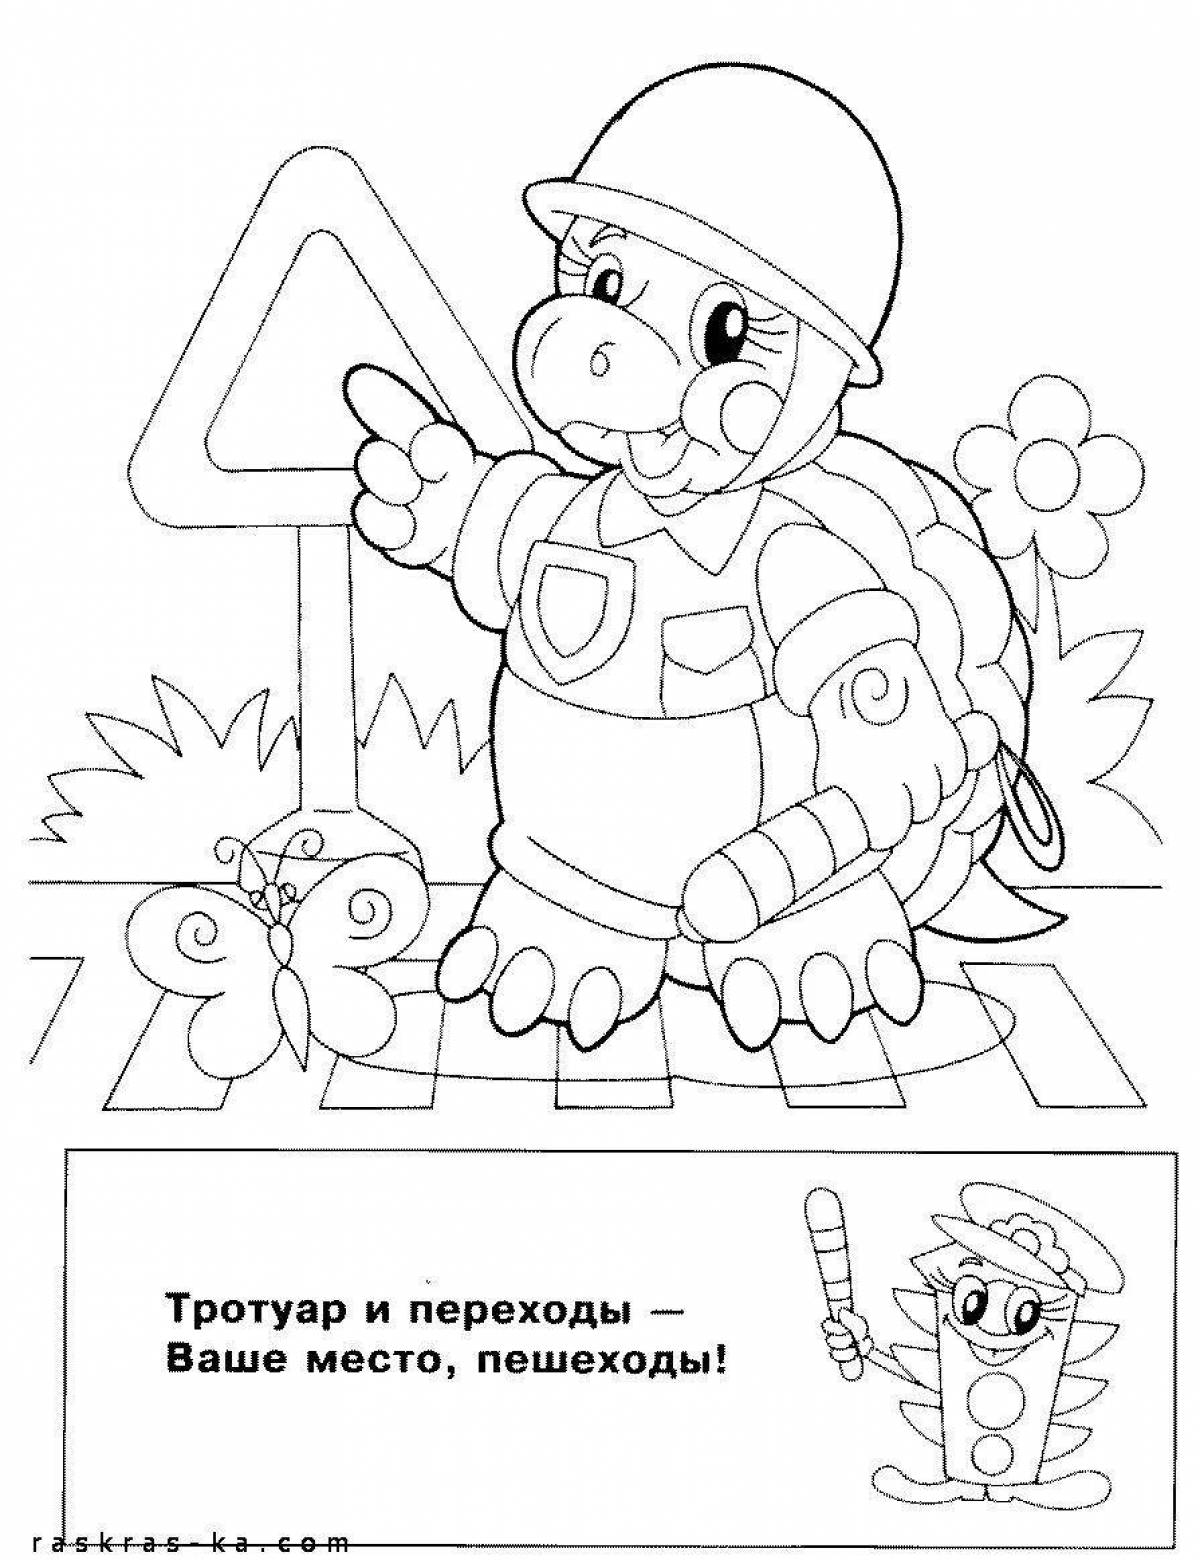 Vibrant safety alphabet coloring page for kids